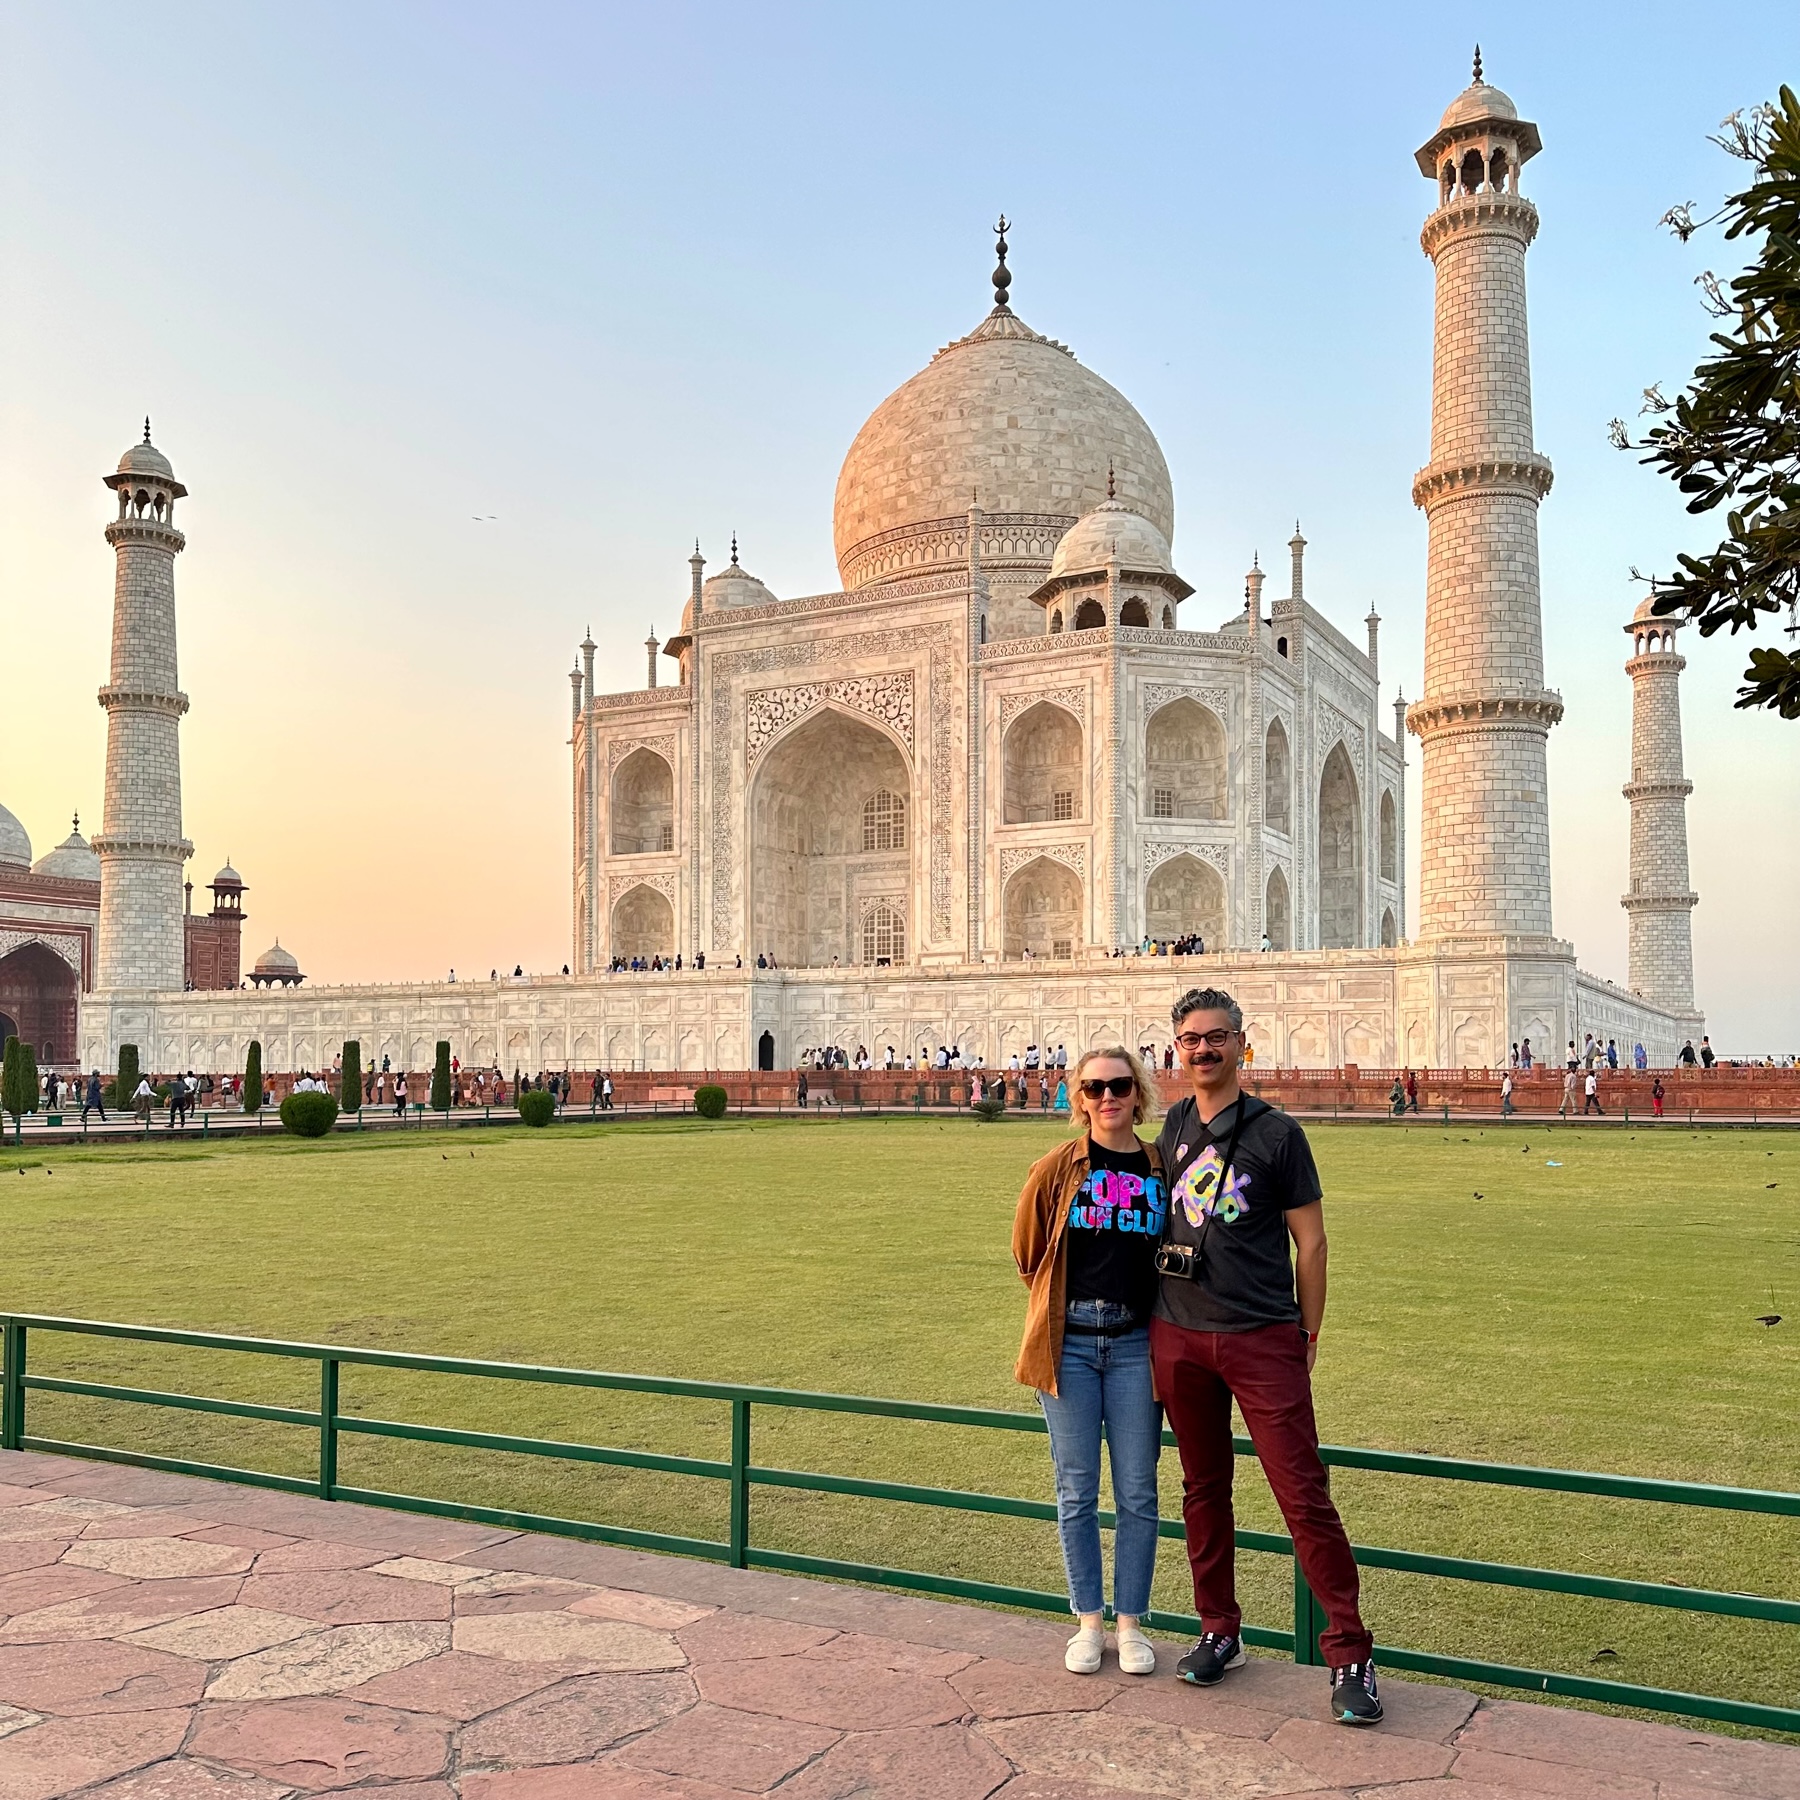 Jenni and I in front of the Taj Mahal which is glowing in sunset yellow-orange color.